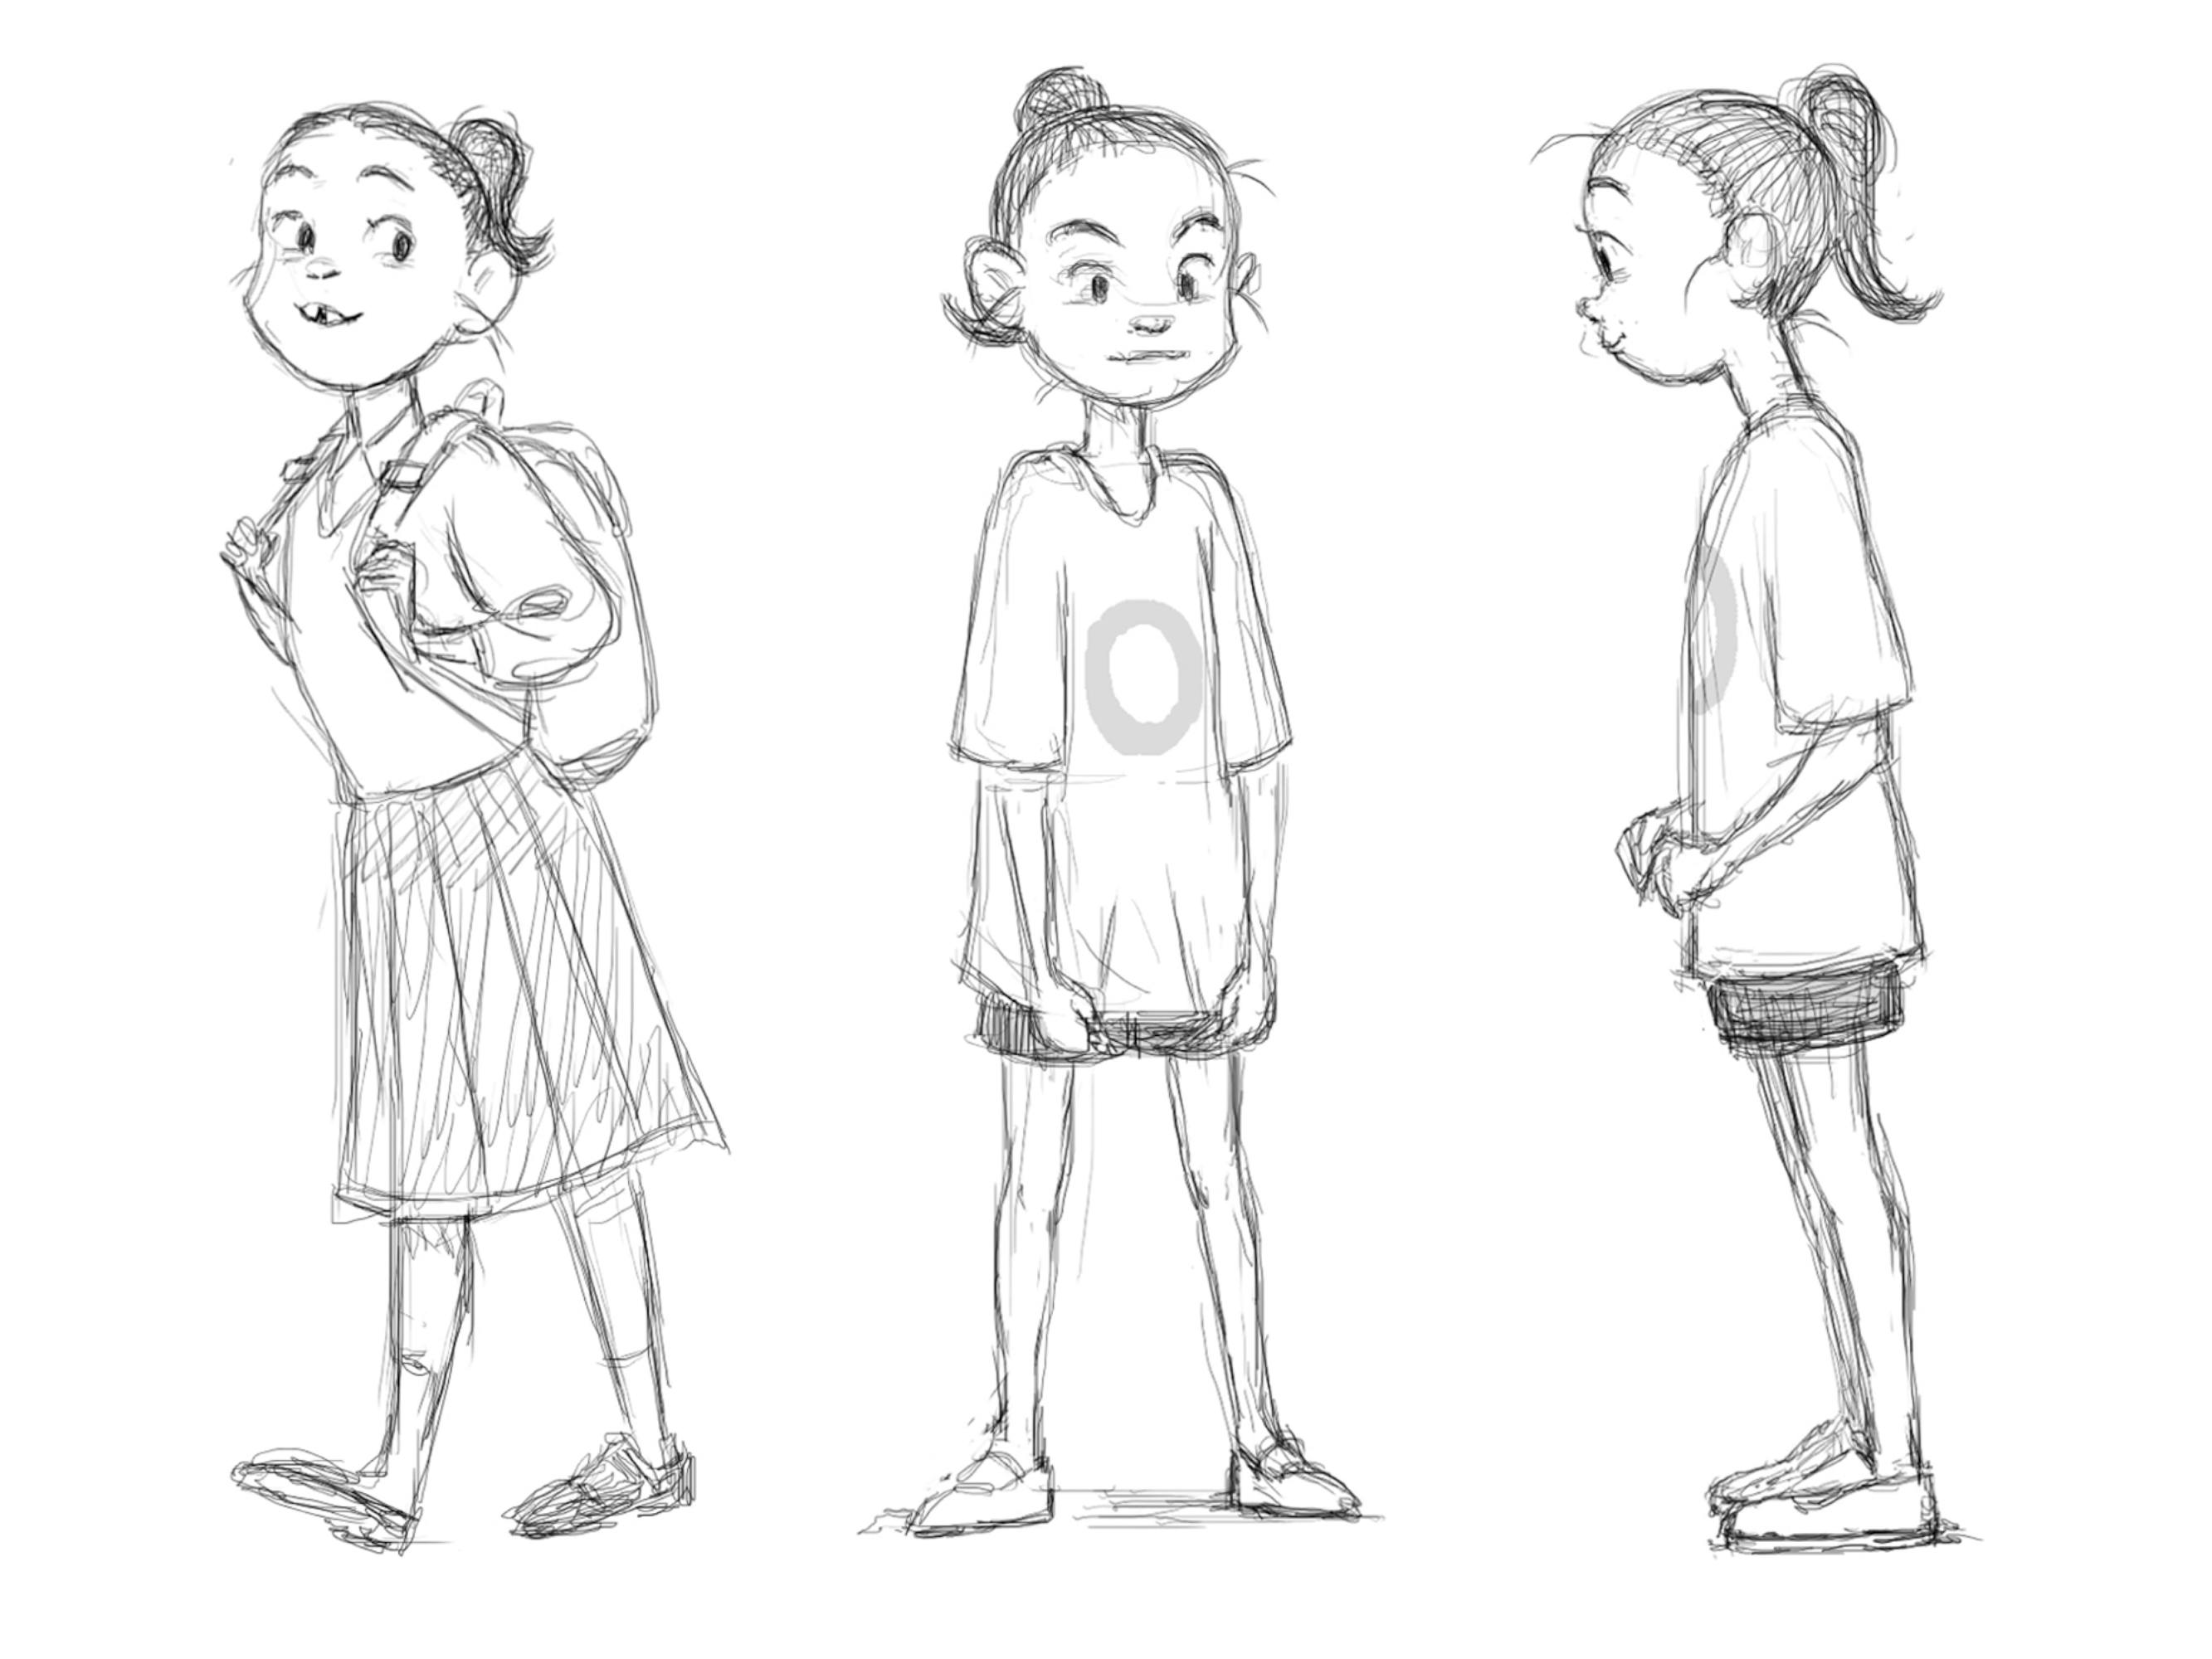 A sketch for If Anything Happens I Love You shows the daughter at the center of the film in three stances. In two, she is wearing a t-shirt and shorts. In the third, she is wearing her school uniform and backpack.